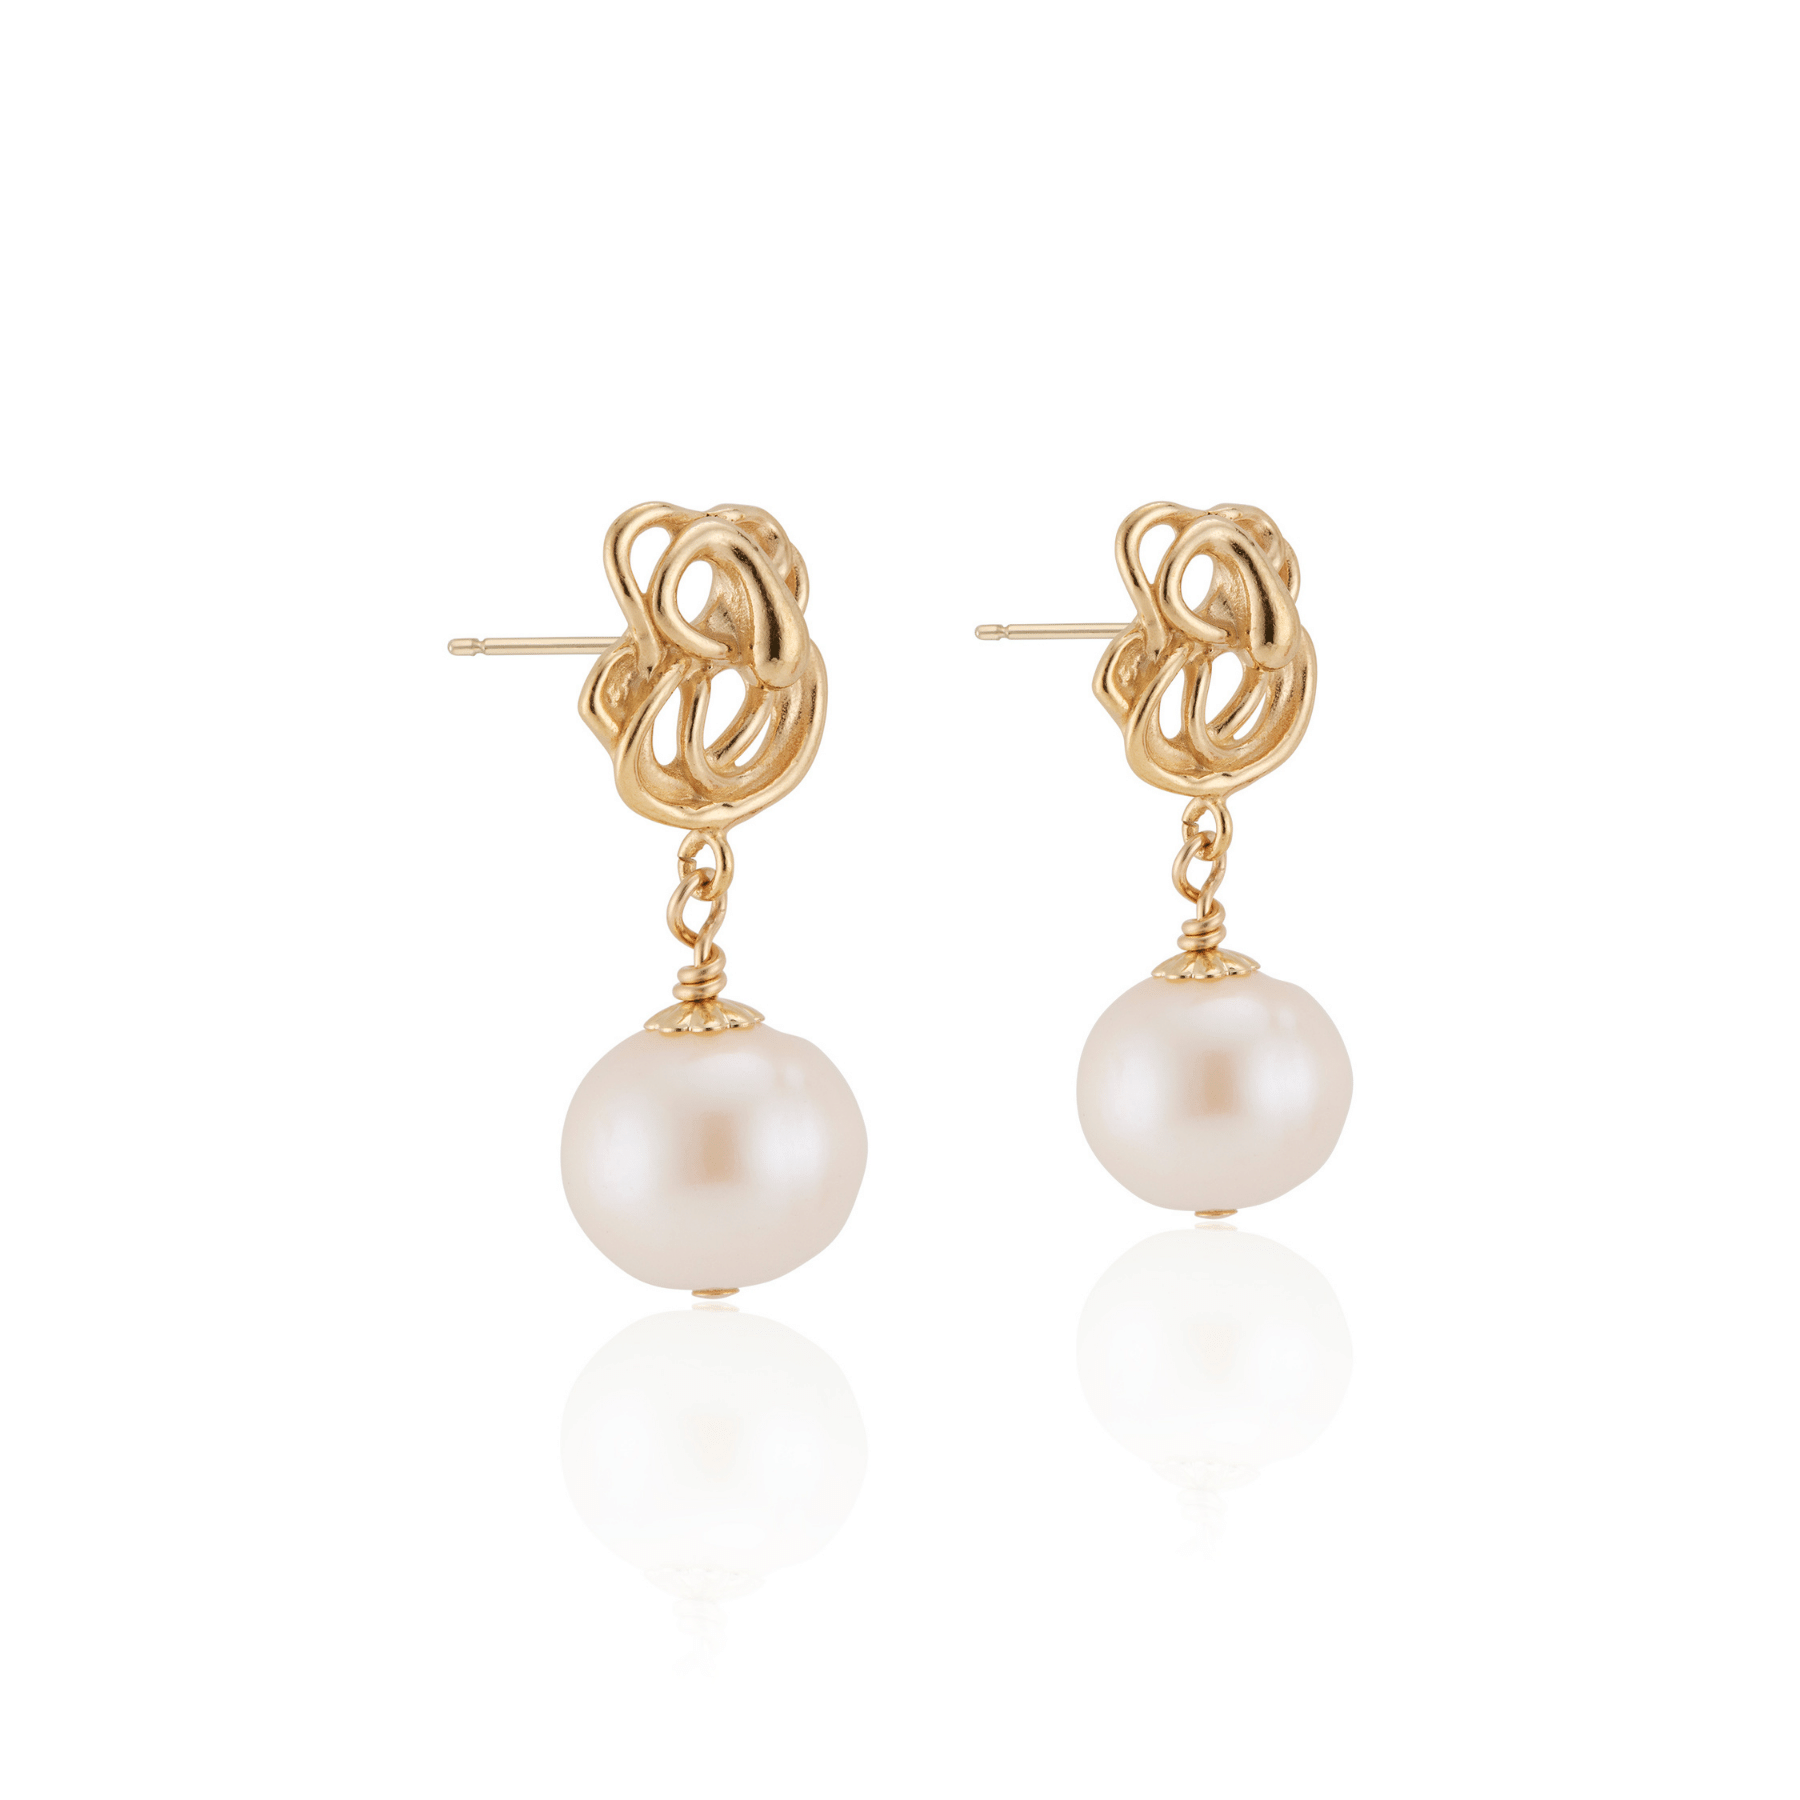 Abstract squiggle drop earrings in 18k gold vermeil with cultured freshwater pearl drops